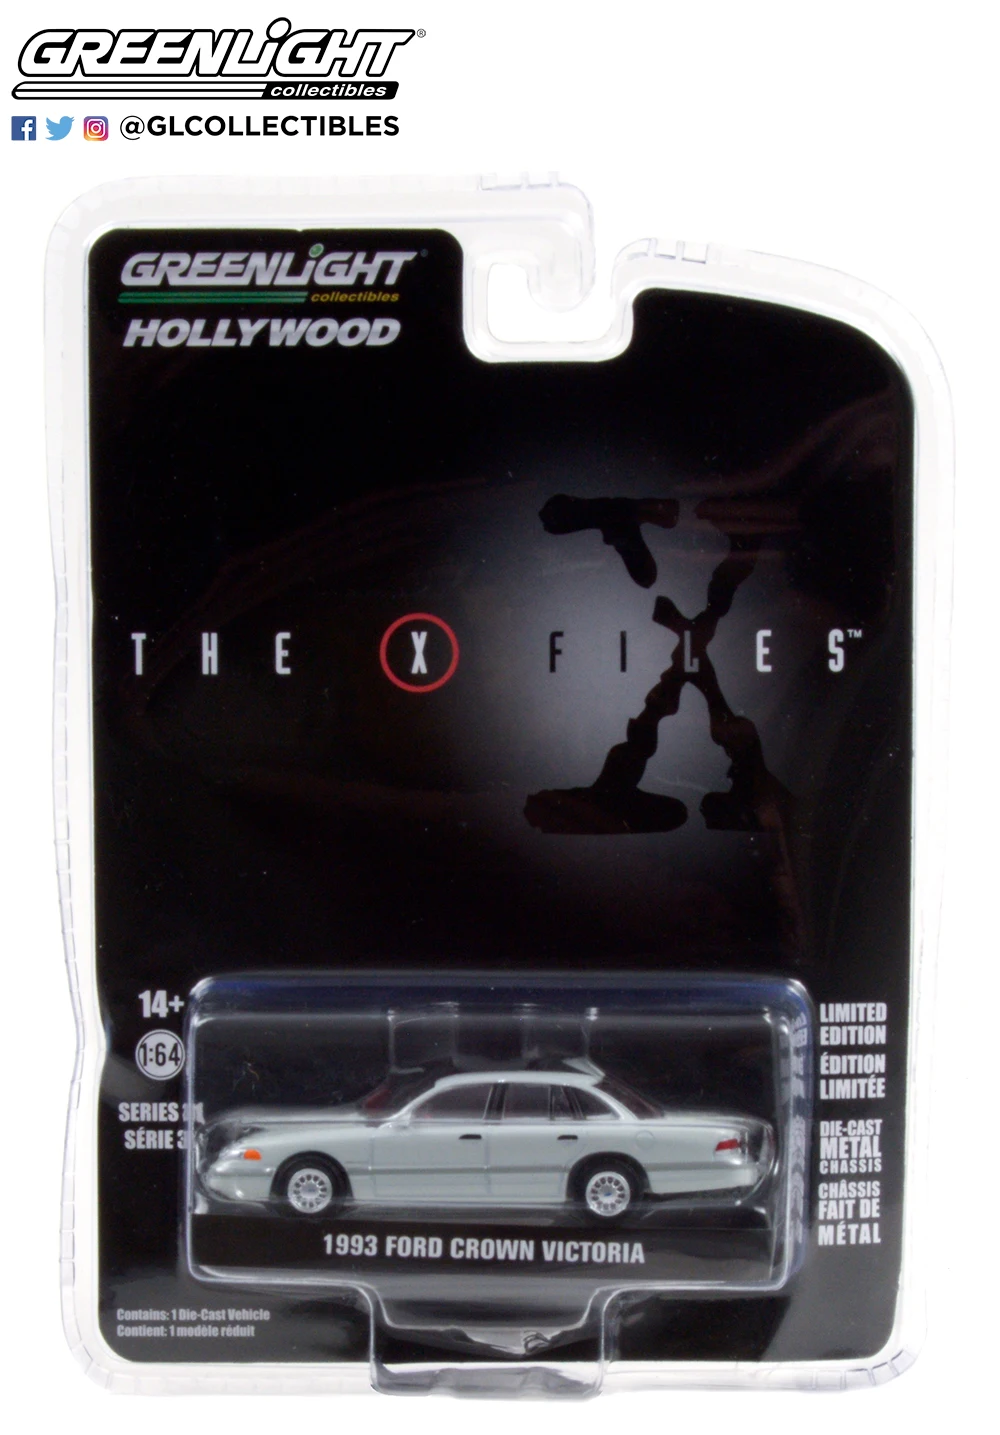 

GREENLIGHT CARS 1:64 The X-Files 1993 Ford Crown Victoria - Washington DC plainclothes car Collect alloy die-casting car model